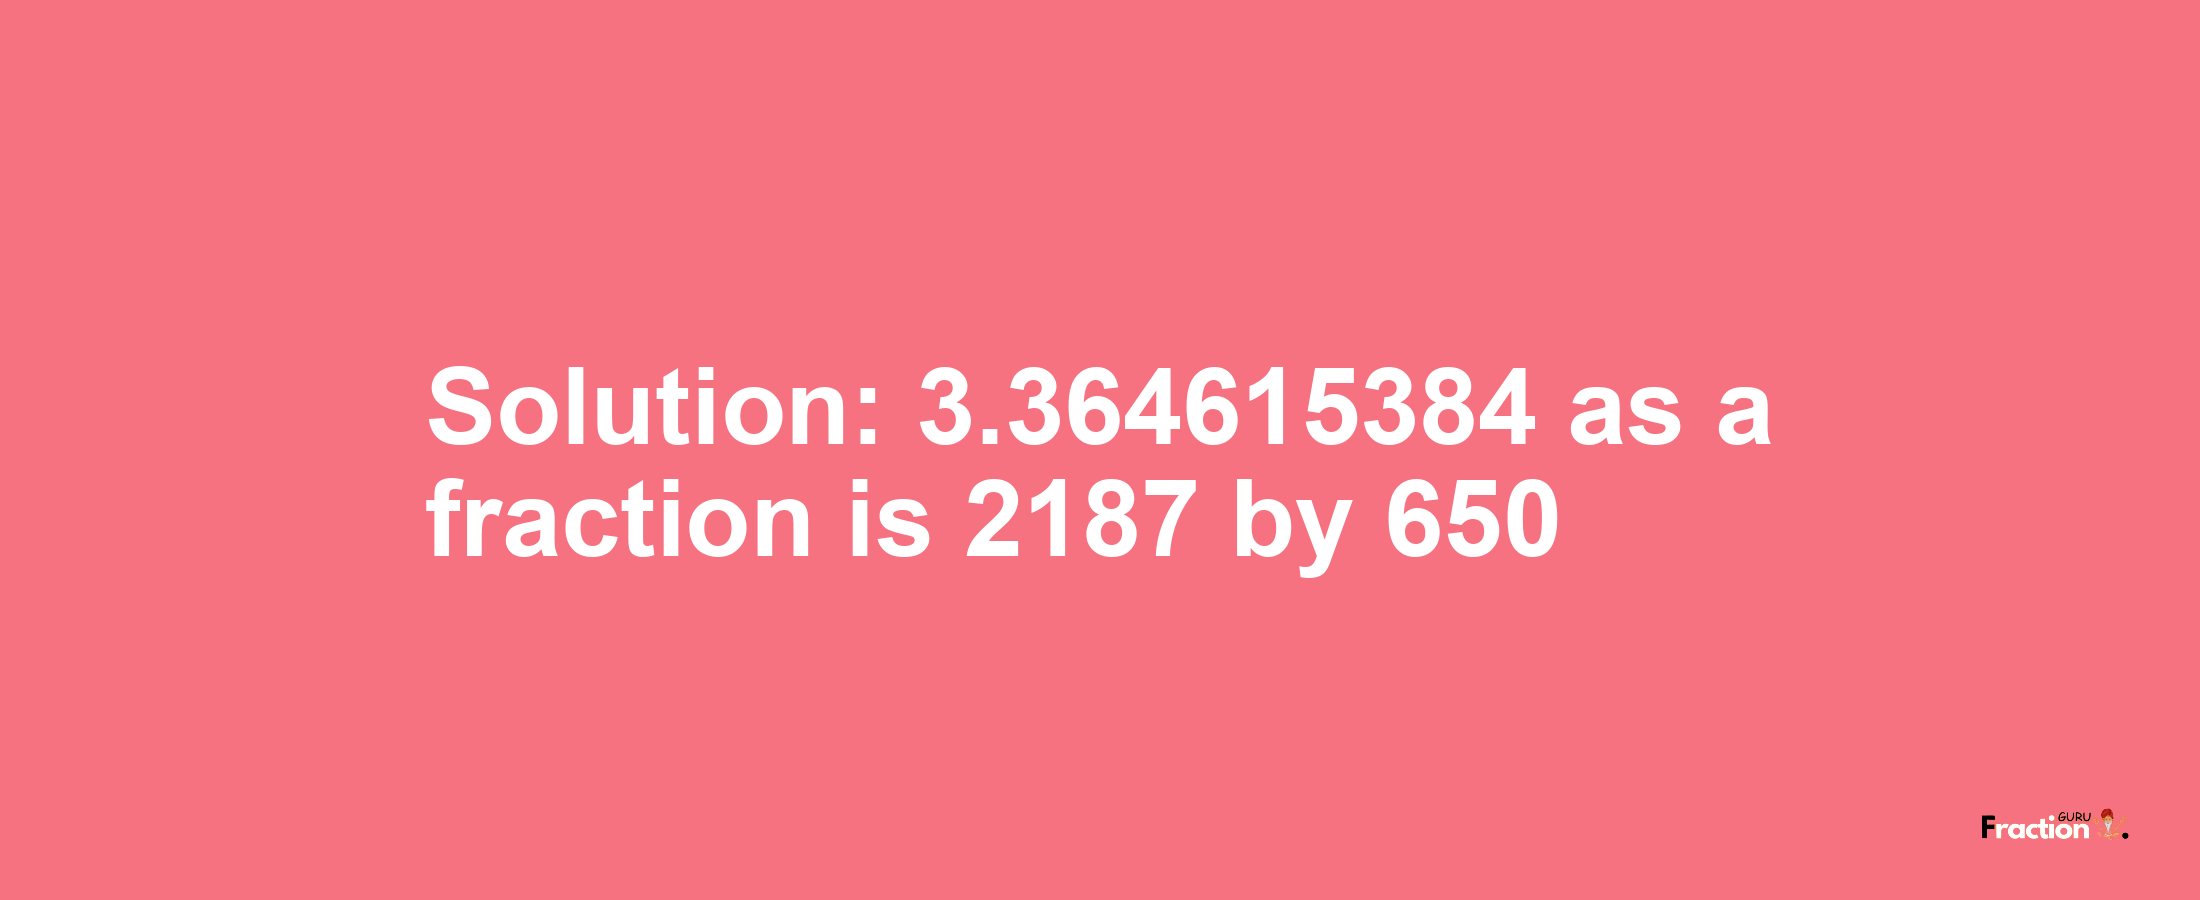 Solution:3.364615384 as a fraction is 2187/650